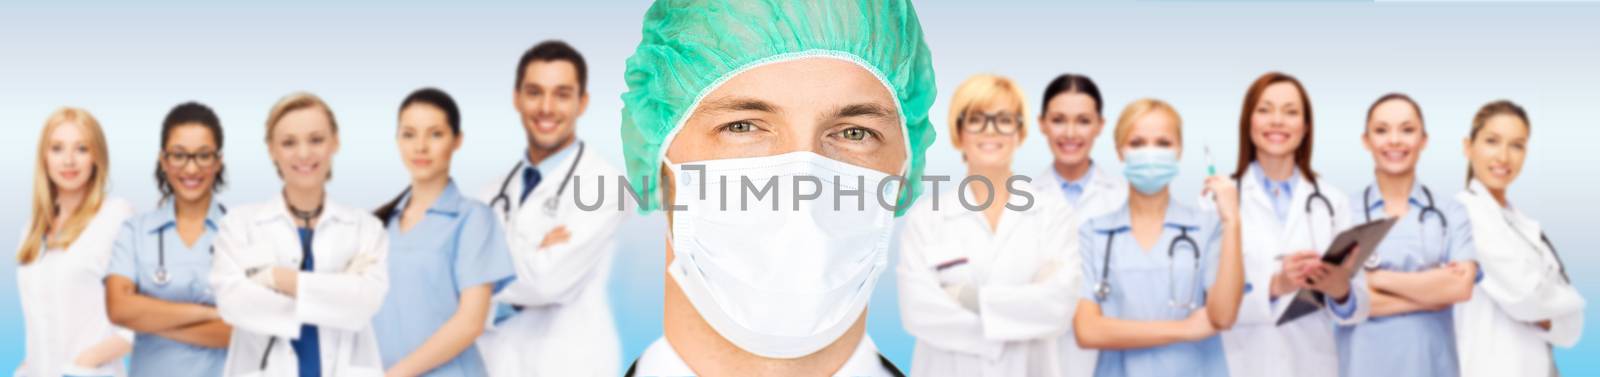 surgeon in medical cap and mask over team by dolgachov